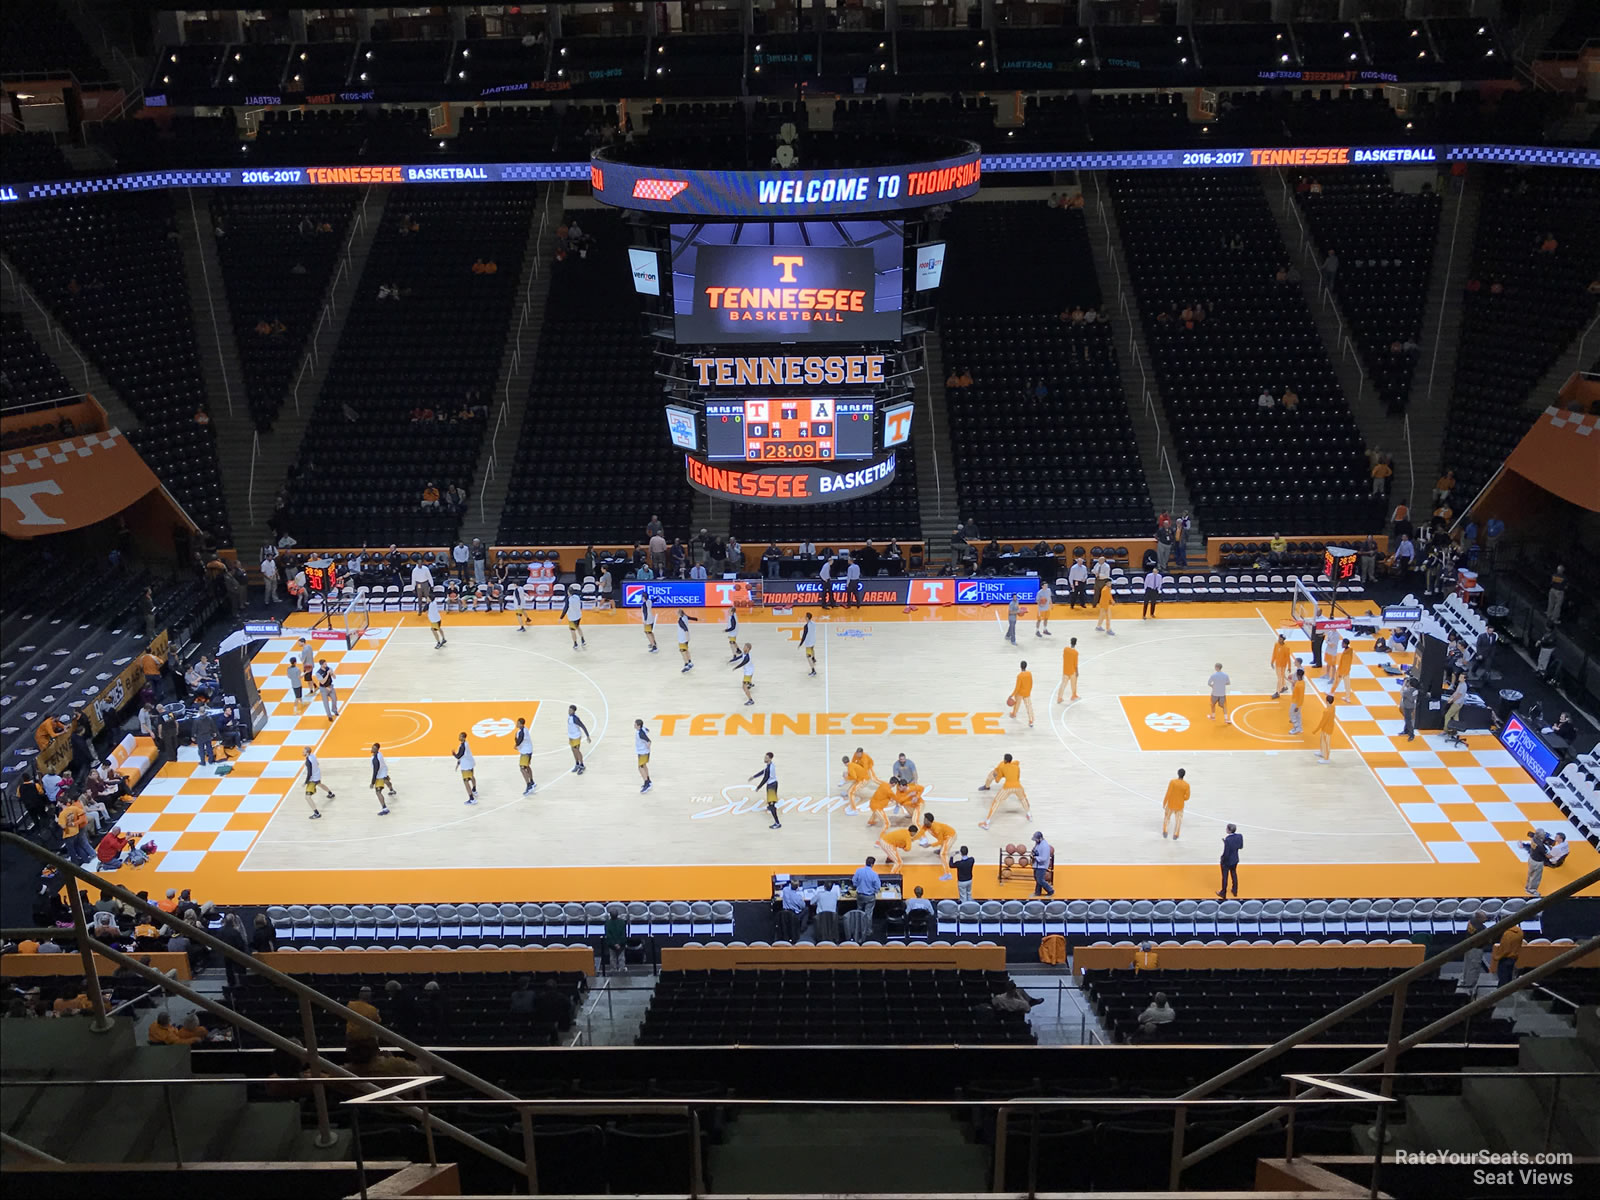 Thompson-Boling Arena Section 321 - RateYourSeats.com